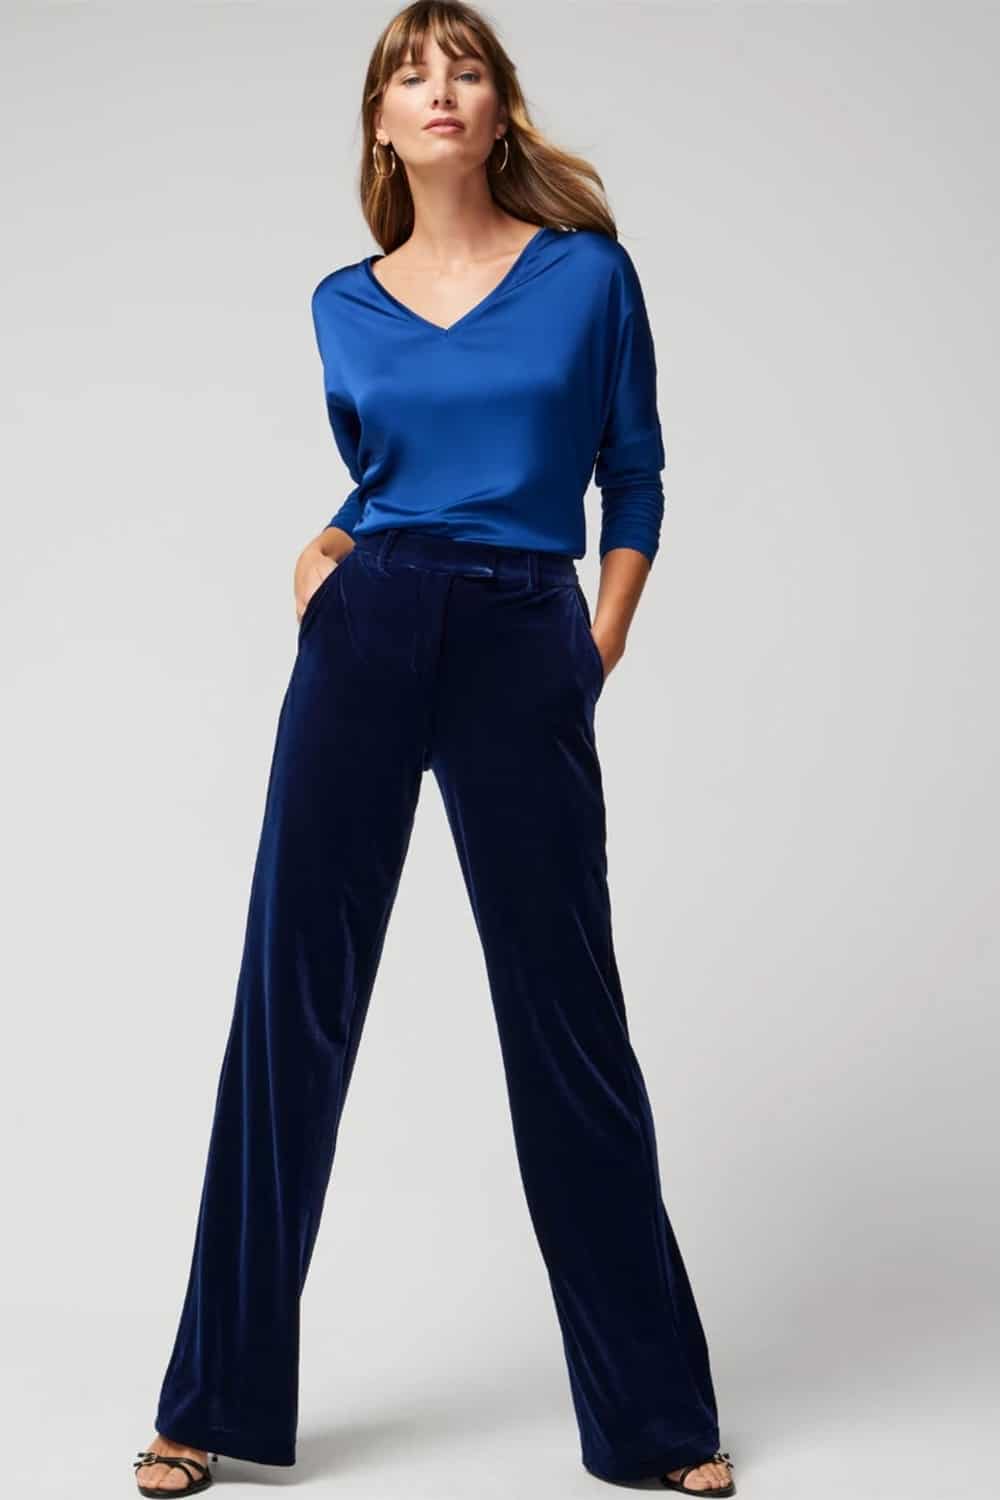 Casual Thanksgiving Outfit Idea - Velvet pants and satin top